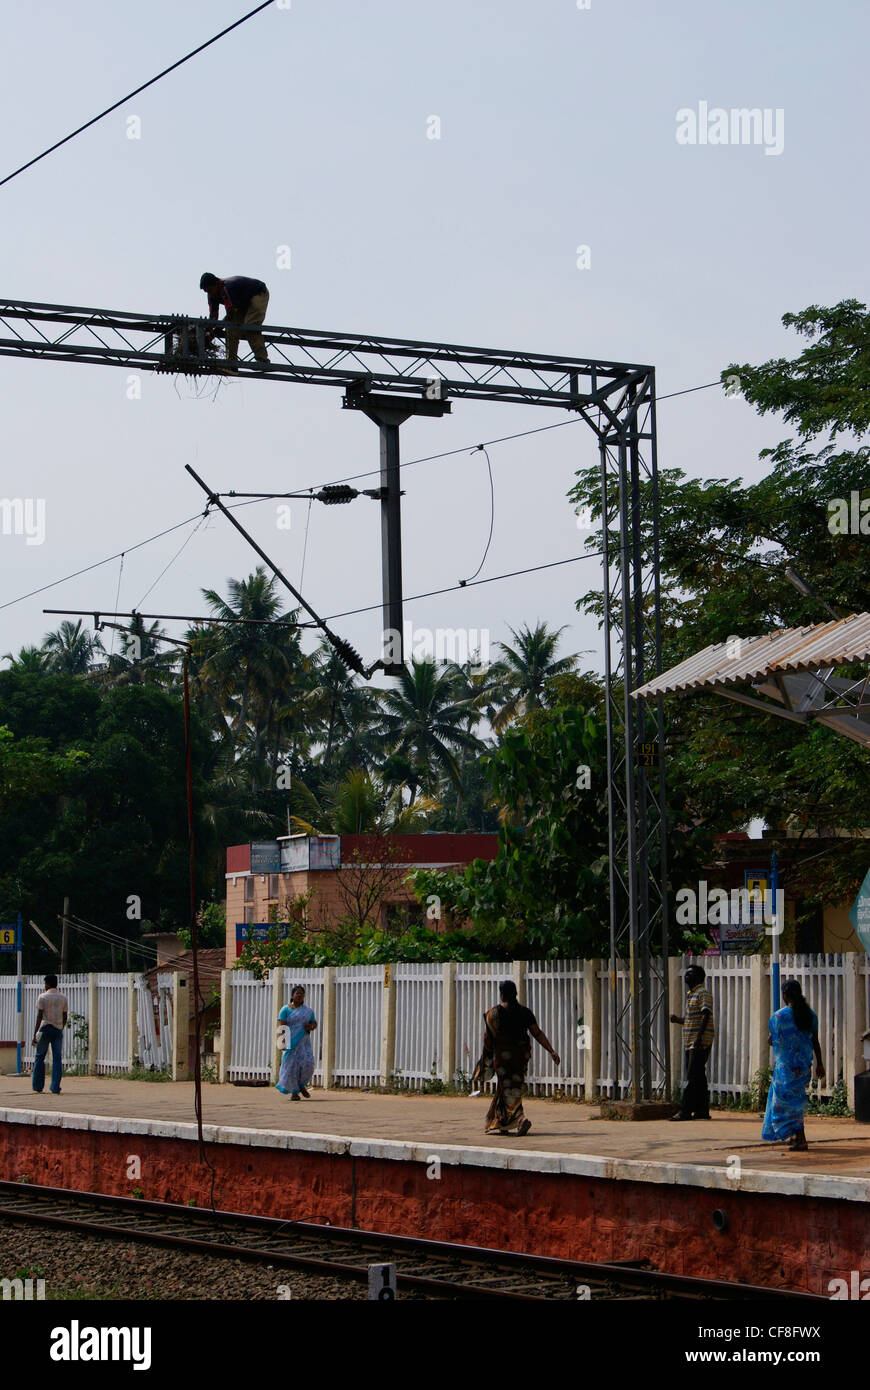 Man taking Birds nest from the top of Heavy Voltage Electric railway line.A Scene from Chirayinkeezhu Railway station ,India Stock Photo